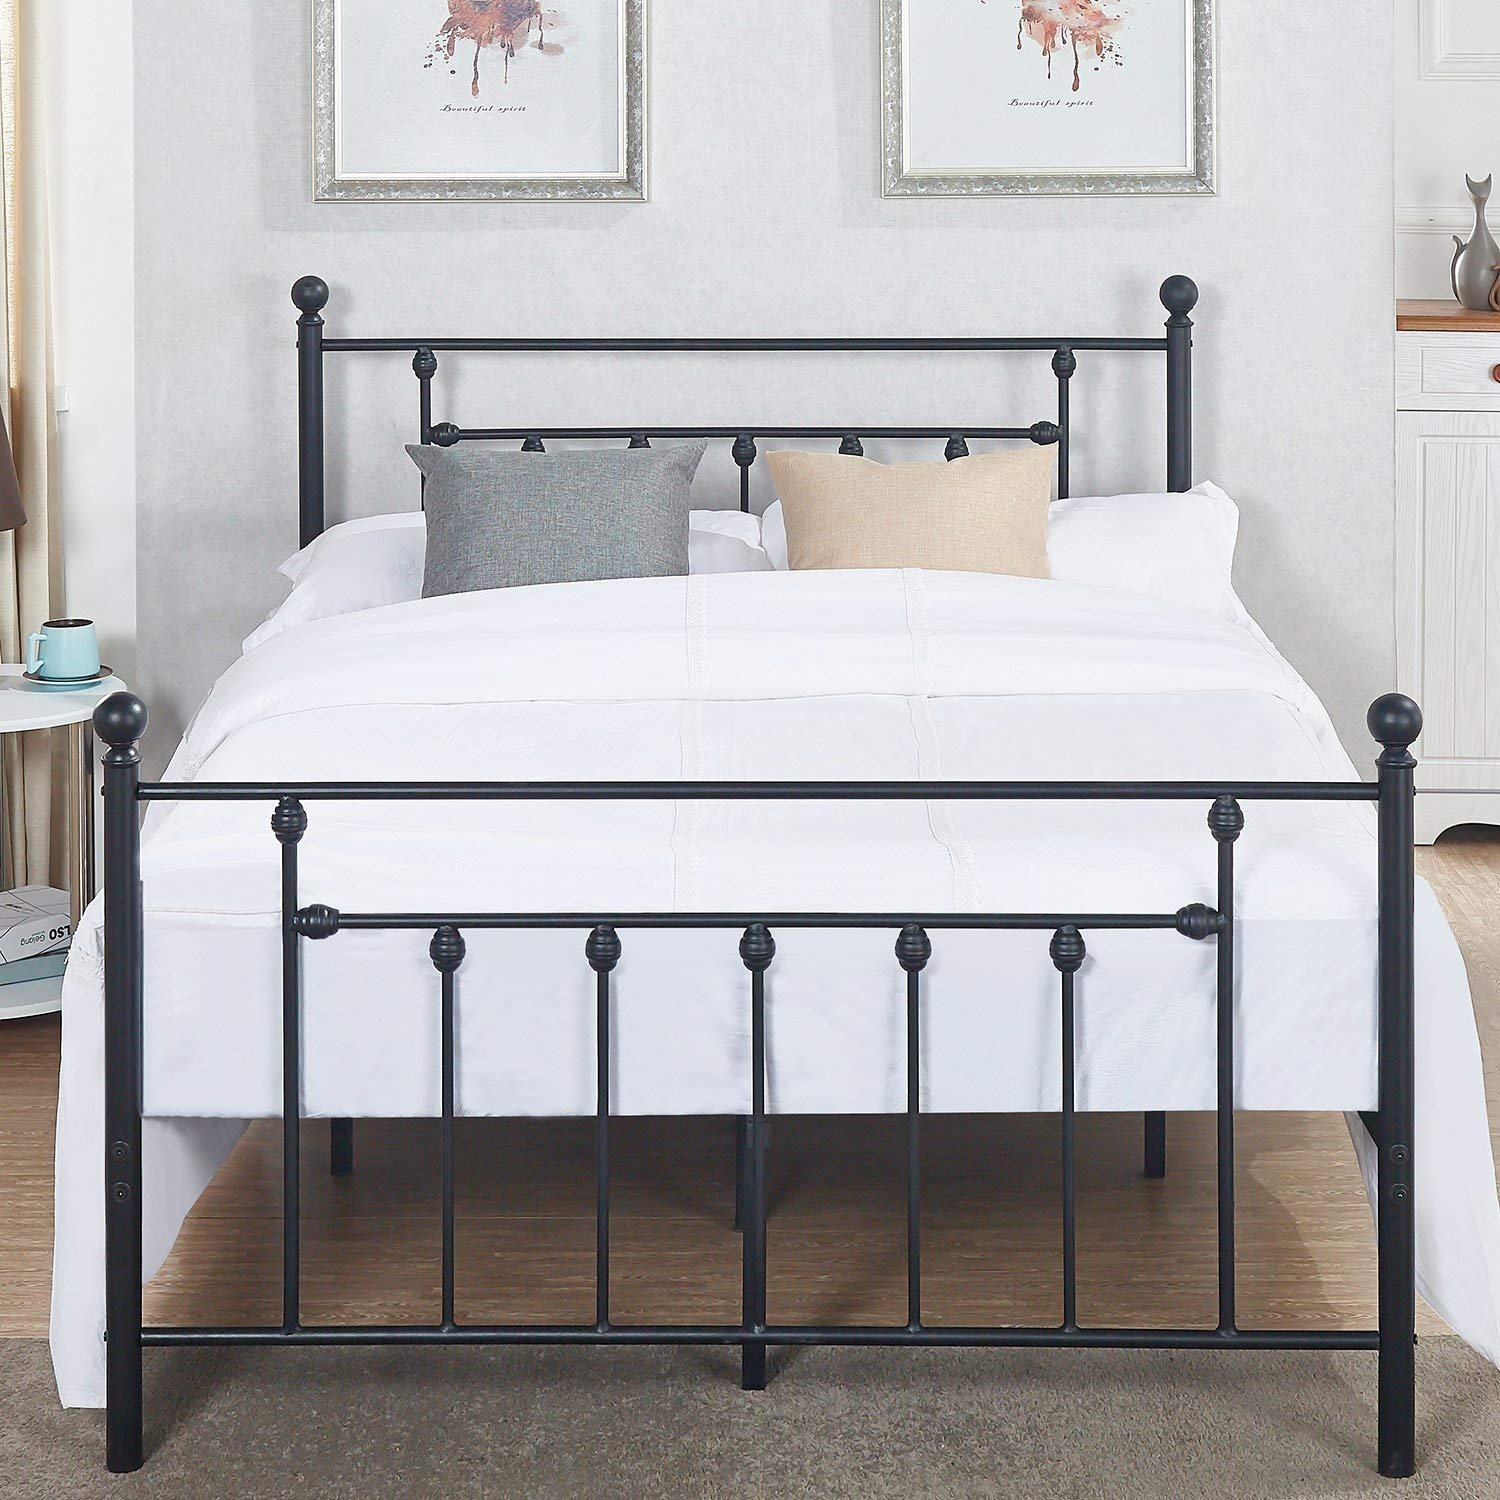 vecelo metal beds victorian platform frames with queen full twin size headboard style accent table free shipping today gold round coffee pottery barn white dishes all modern side